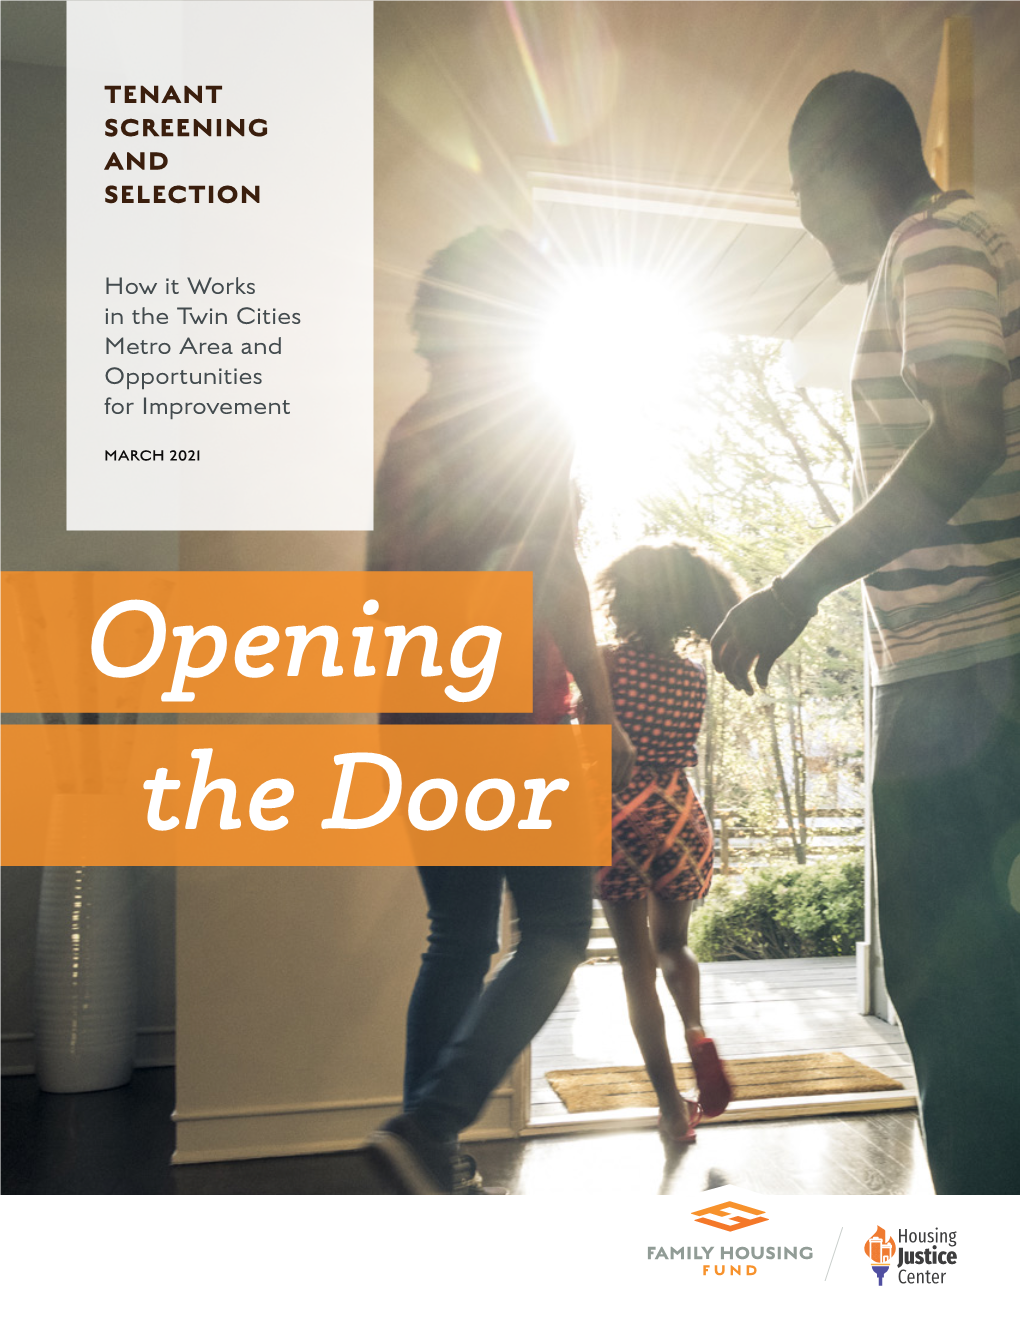 Opening the Door: Tenant Screening and Selection